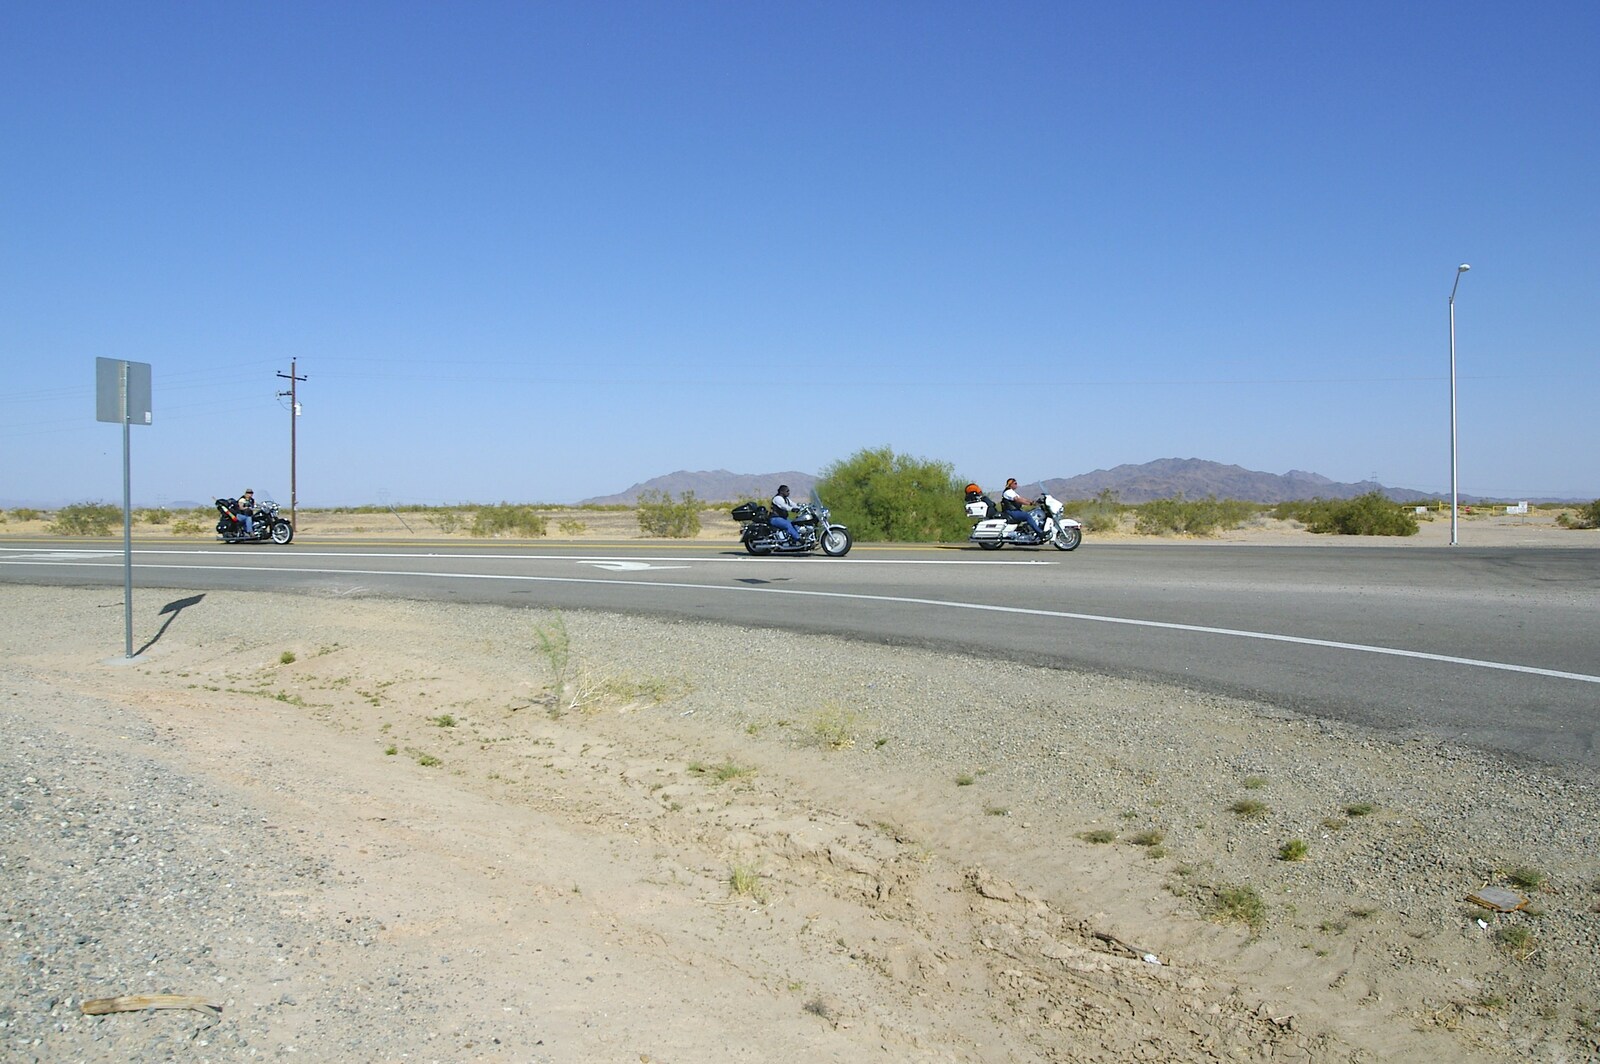 A bunch of Harleys ride around the desert from San Diego Seven: The Desert and the Dunes, Arizona and California, US - 22nd April